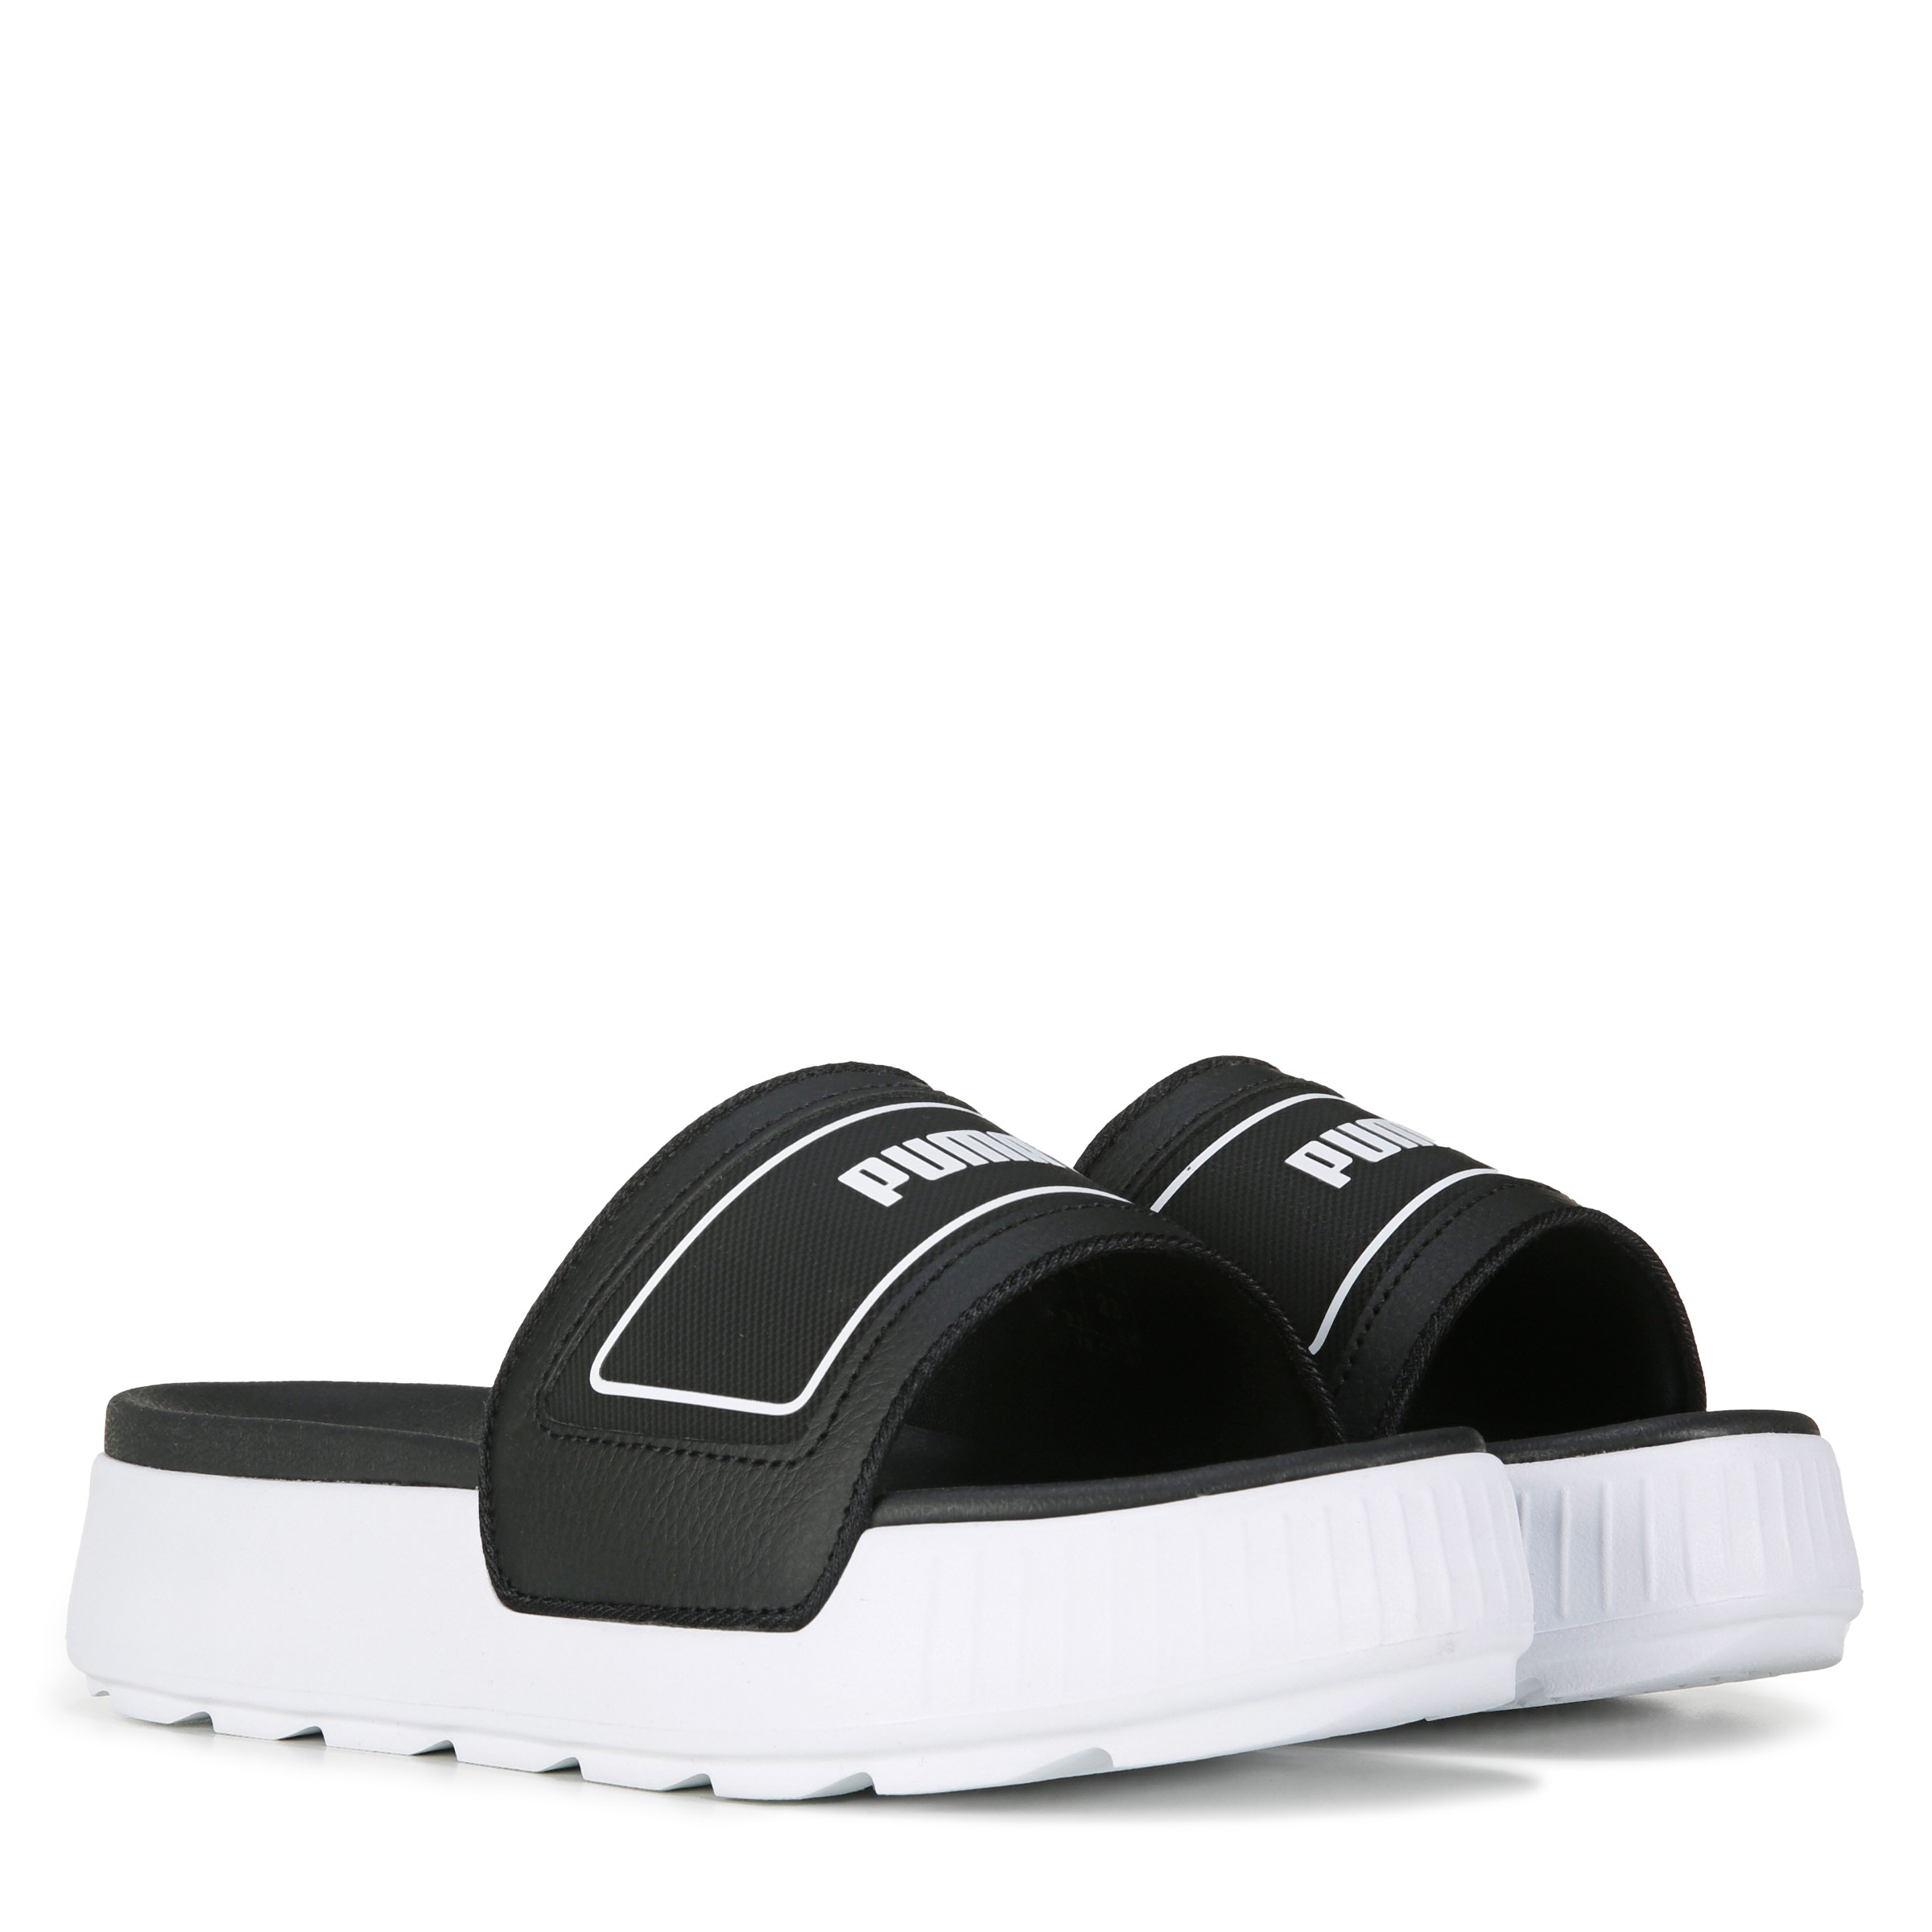 Puma Womens Stampd X Puma Leather Perforated Slide Sandals